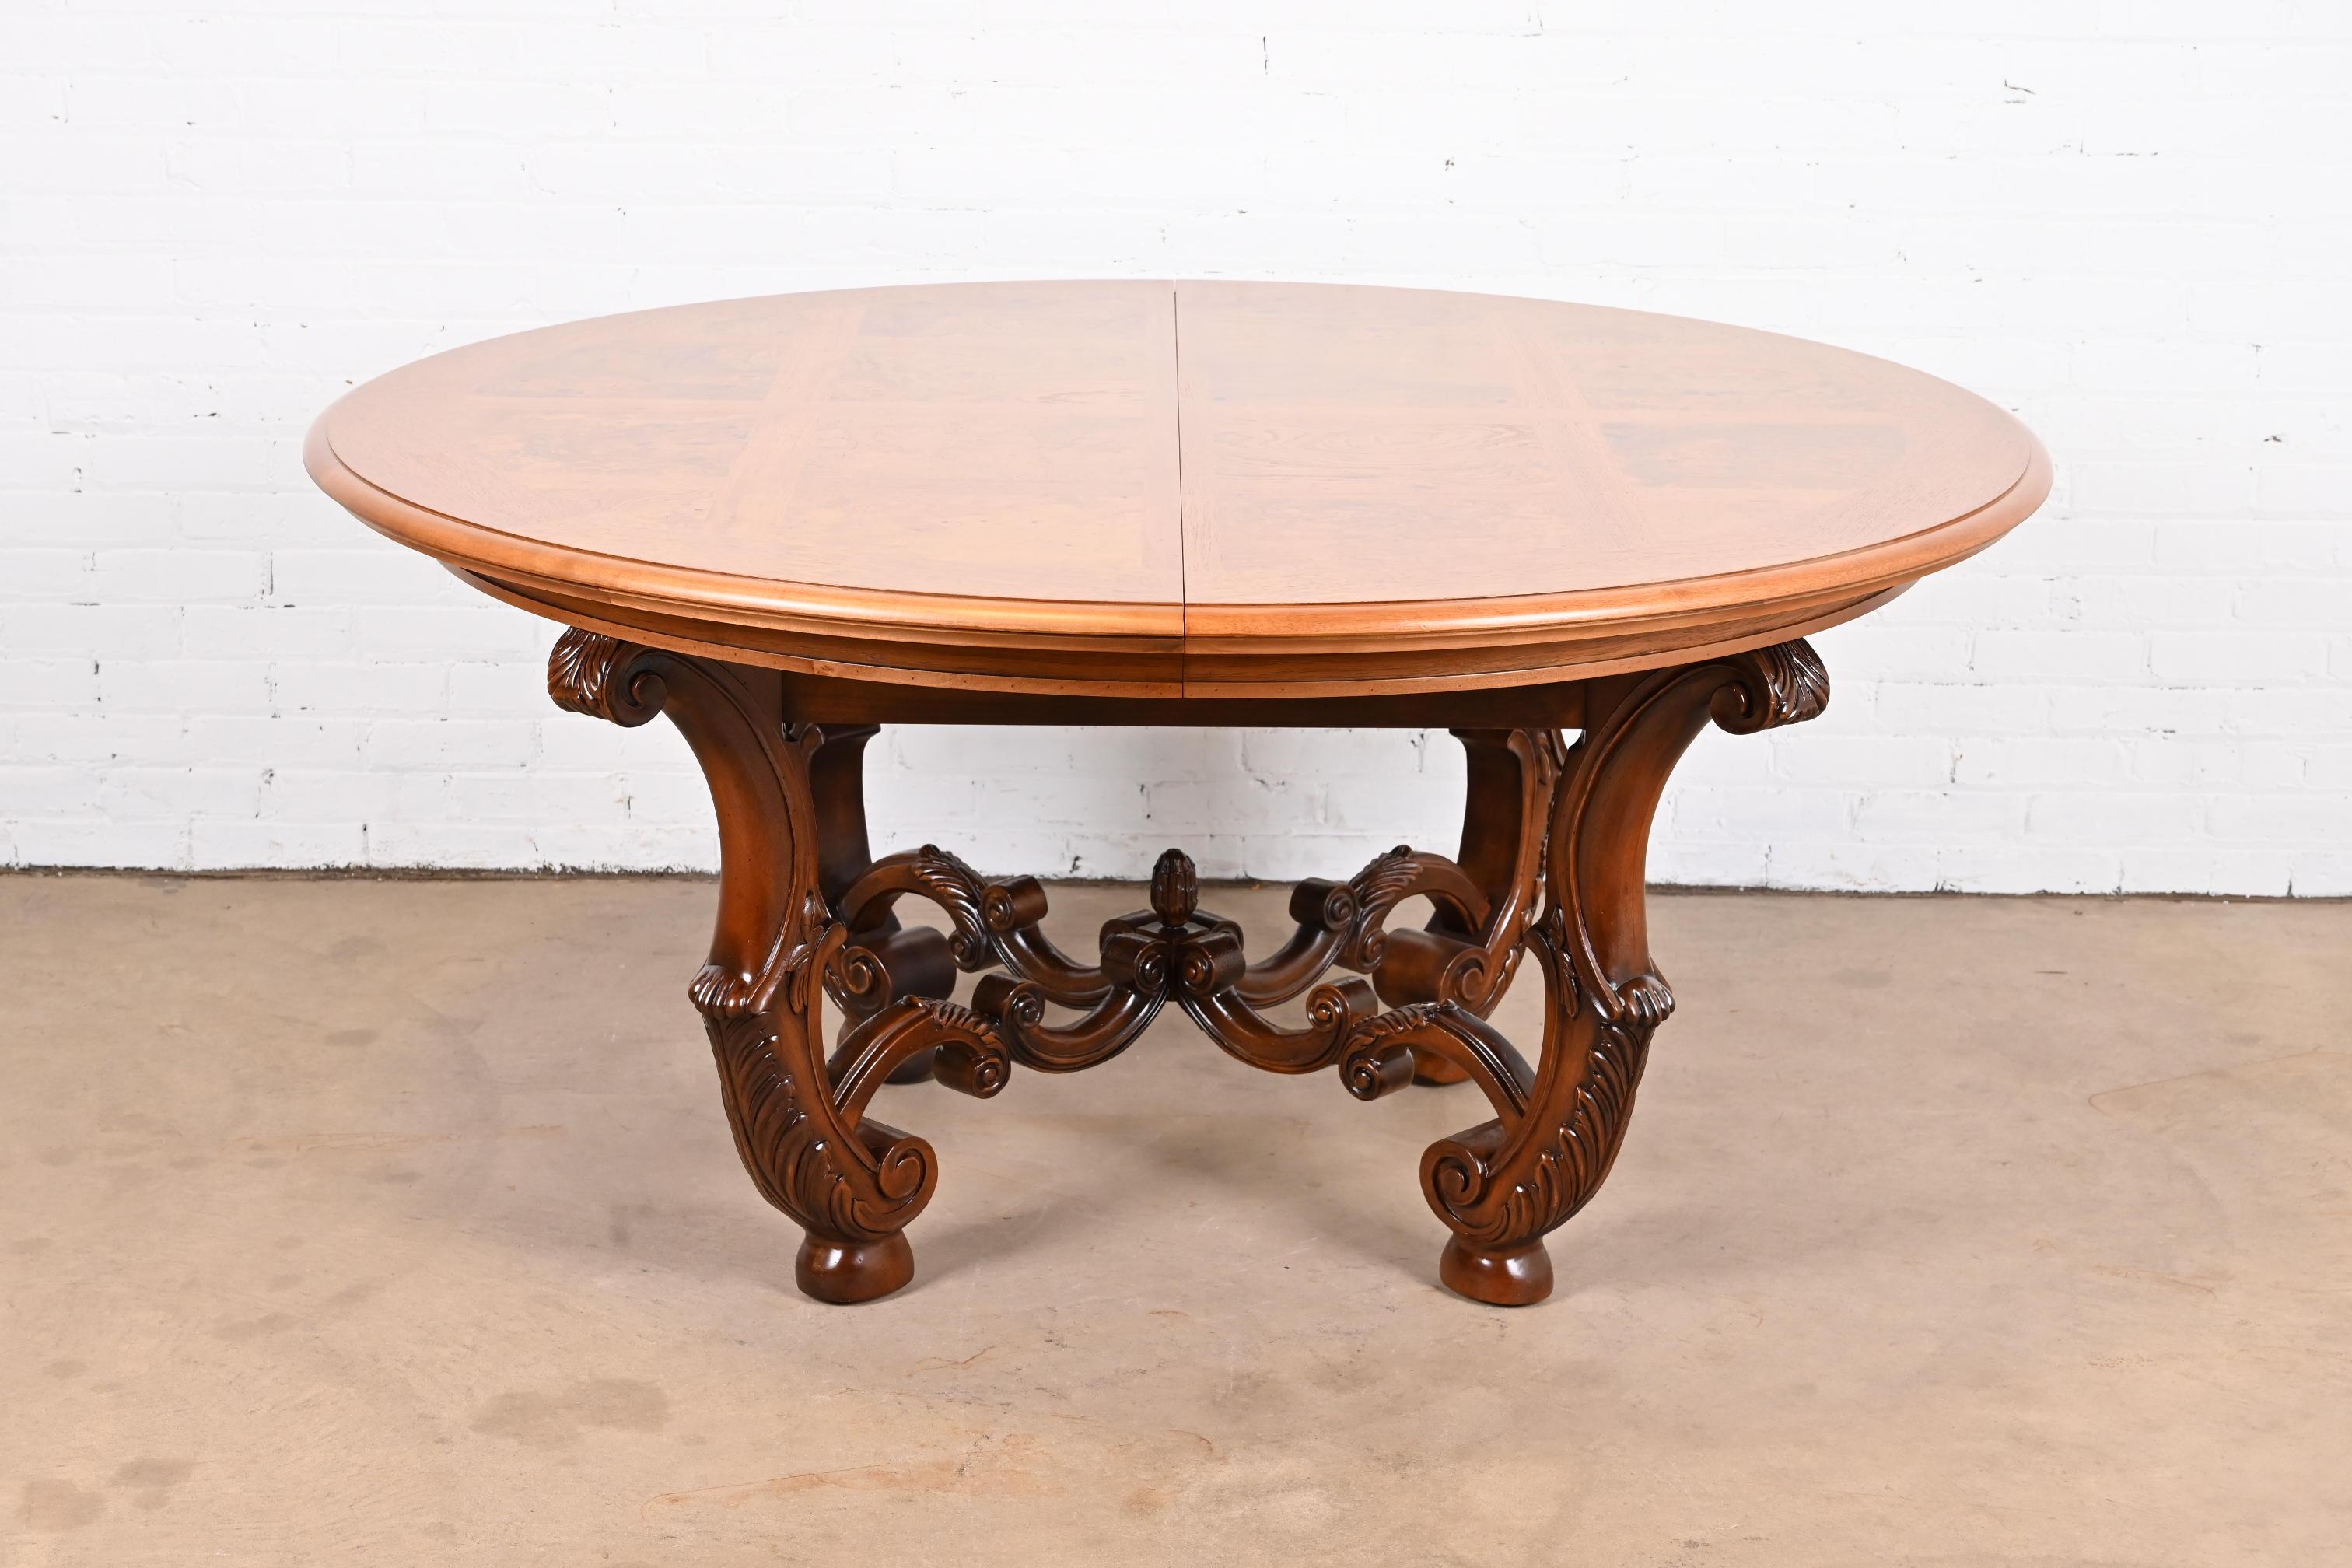 Henredon Italian Provincial Carved Walnut and Burl Wood Pedestal Dining Table For Sale 5